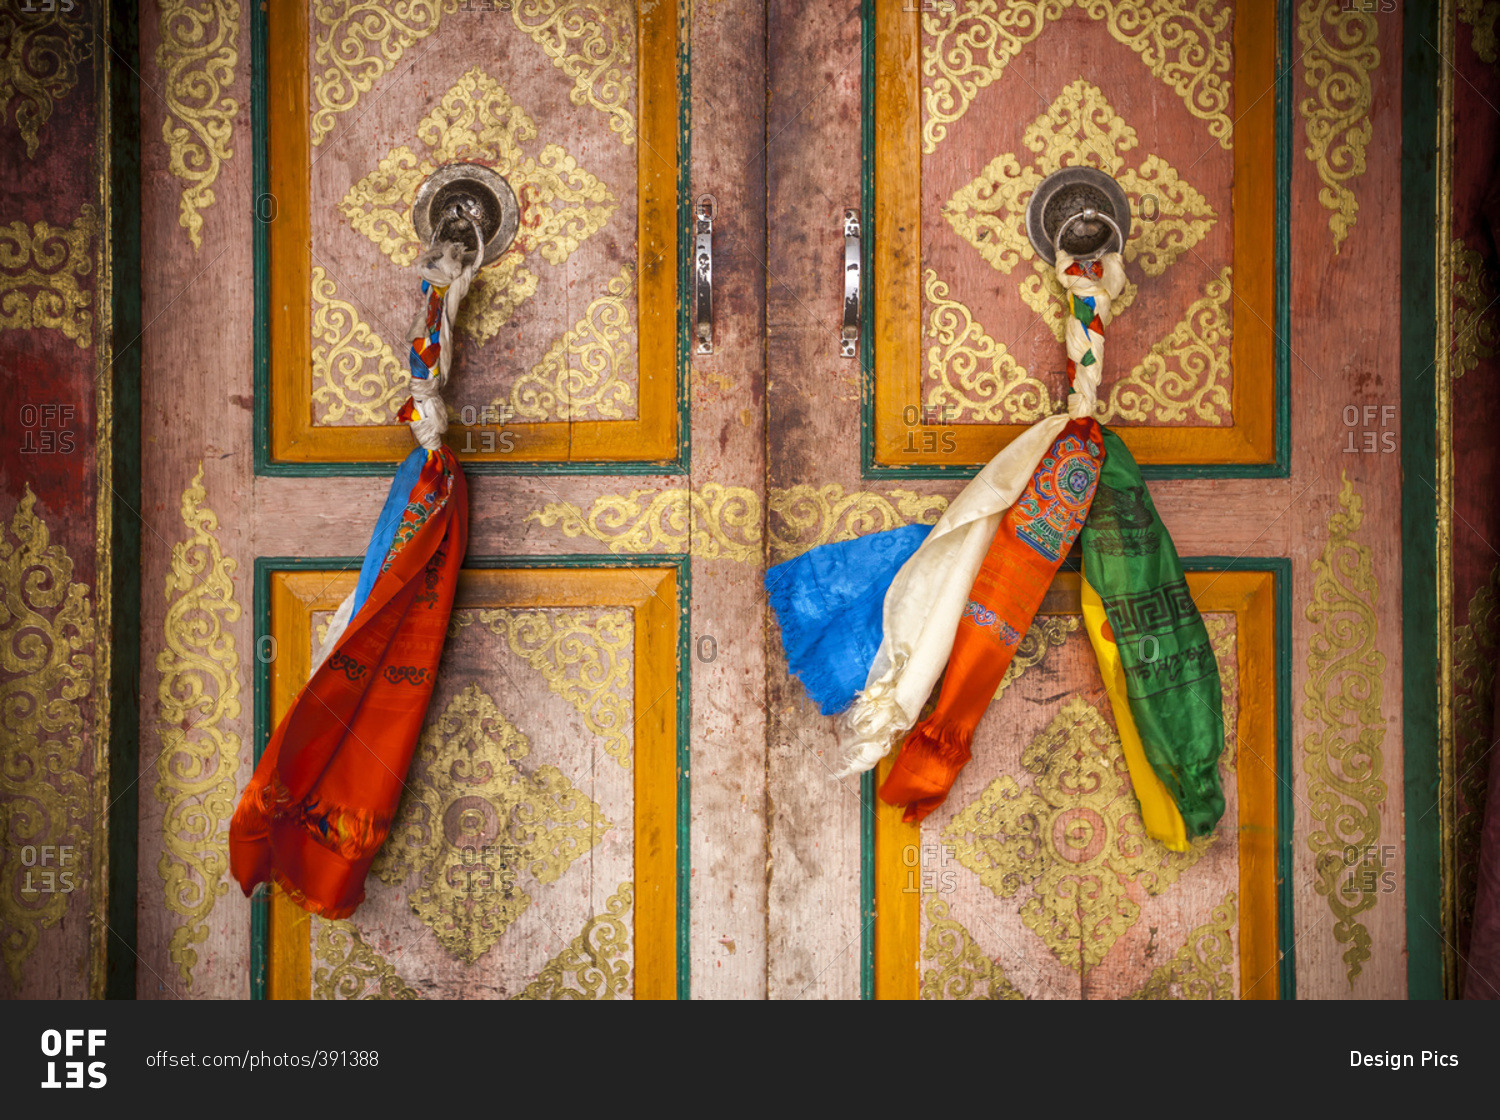 Cloth is braided together to create a decorated door pull on the doors on a Tibetan style monastery